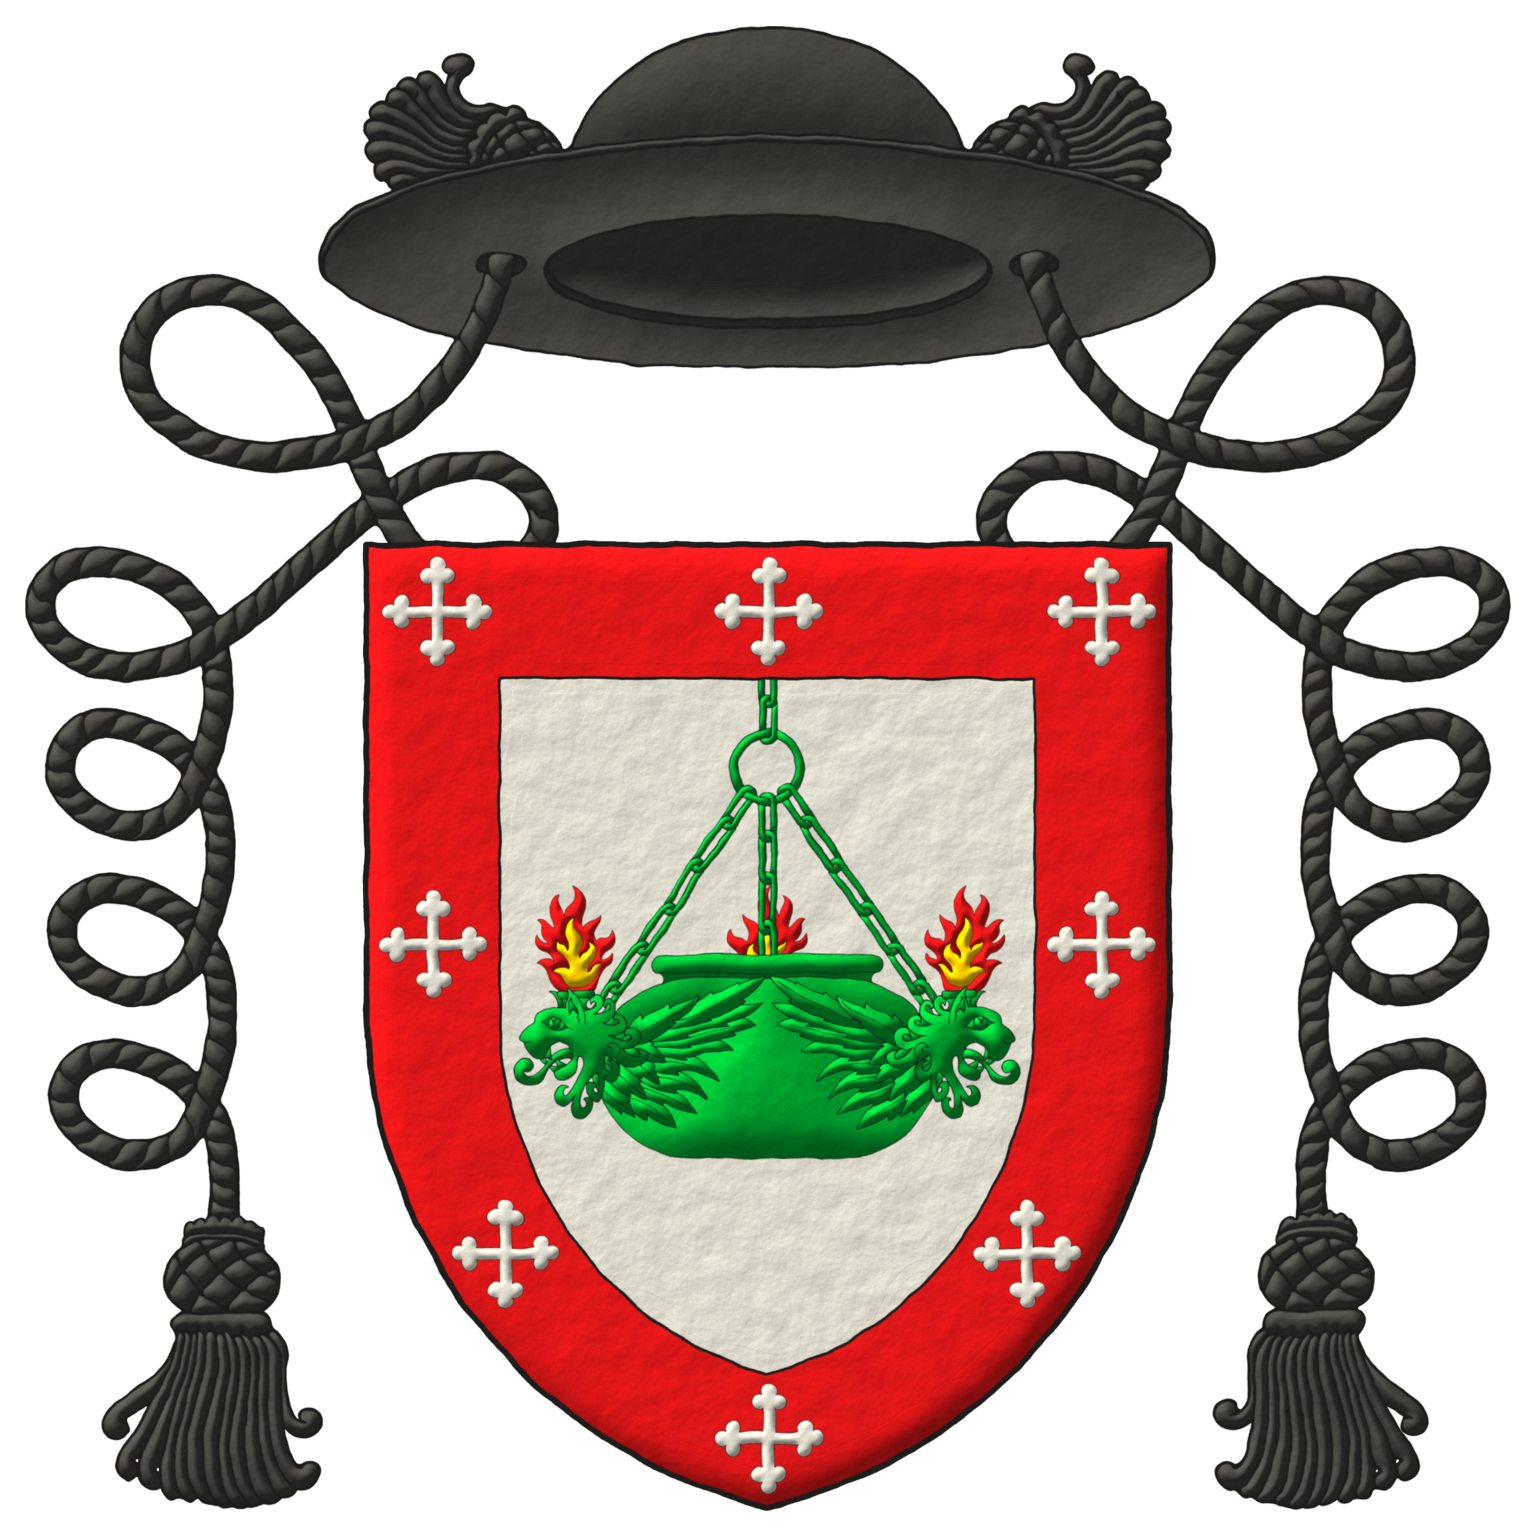 Argent, a suspended lamp of three lions' heads erased and winged Vert, two heads visible, enflamed proper, a bordure Gules, charged with eight crosses bottony Argent. Crest: A galero with two cords, one on each side, each with a tassel Sable.